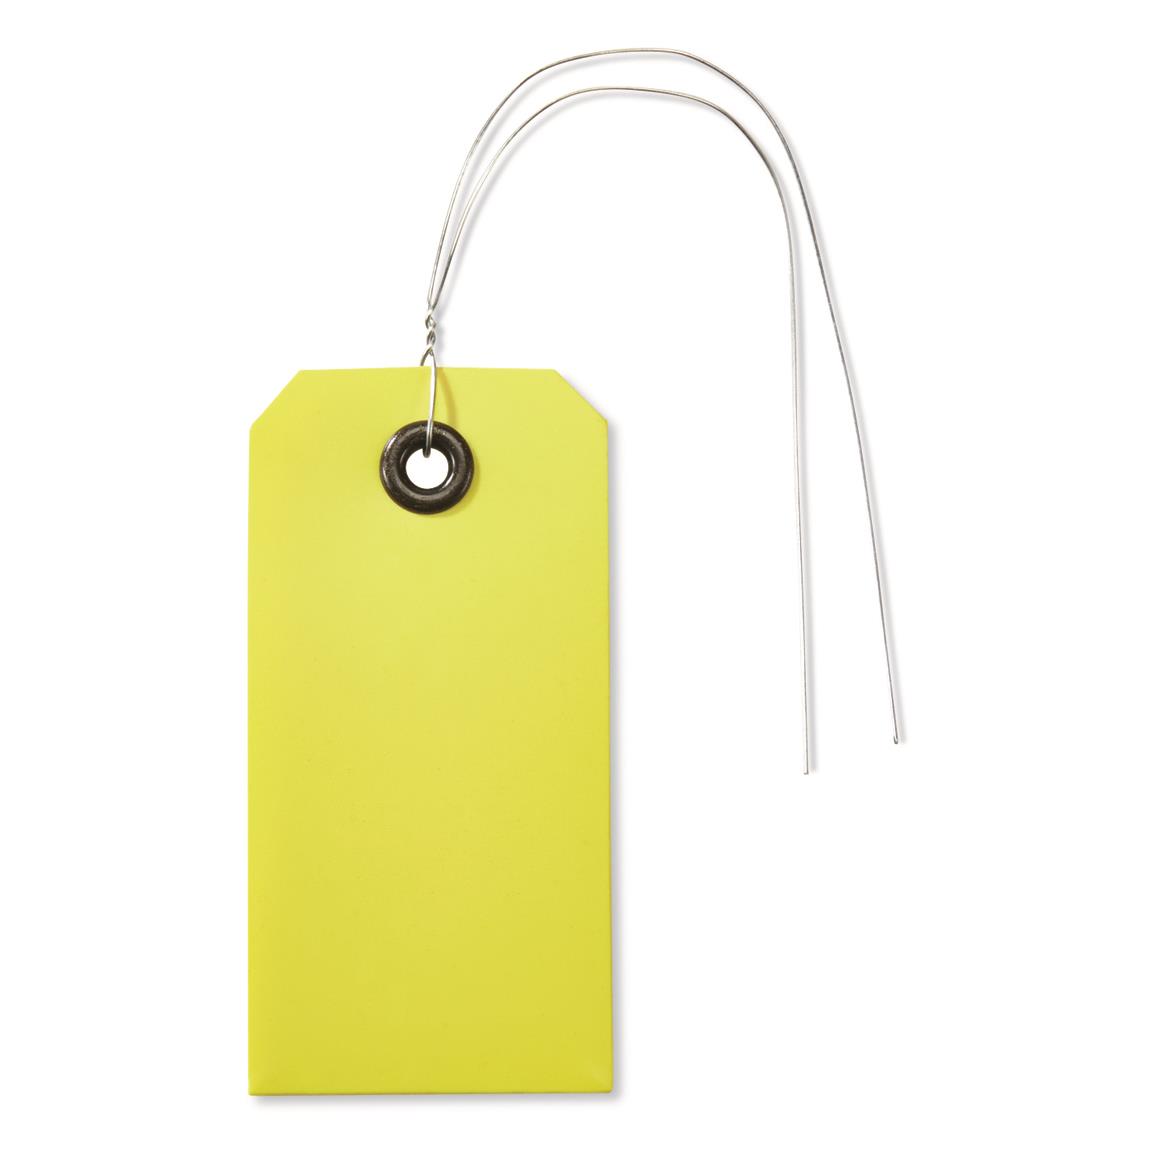 U.S. Military Surplus Hang Tags, 20 Pack, New, Yellow